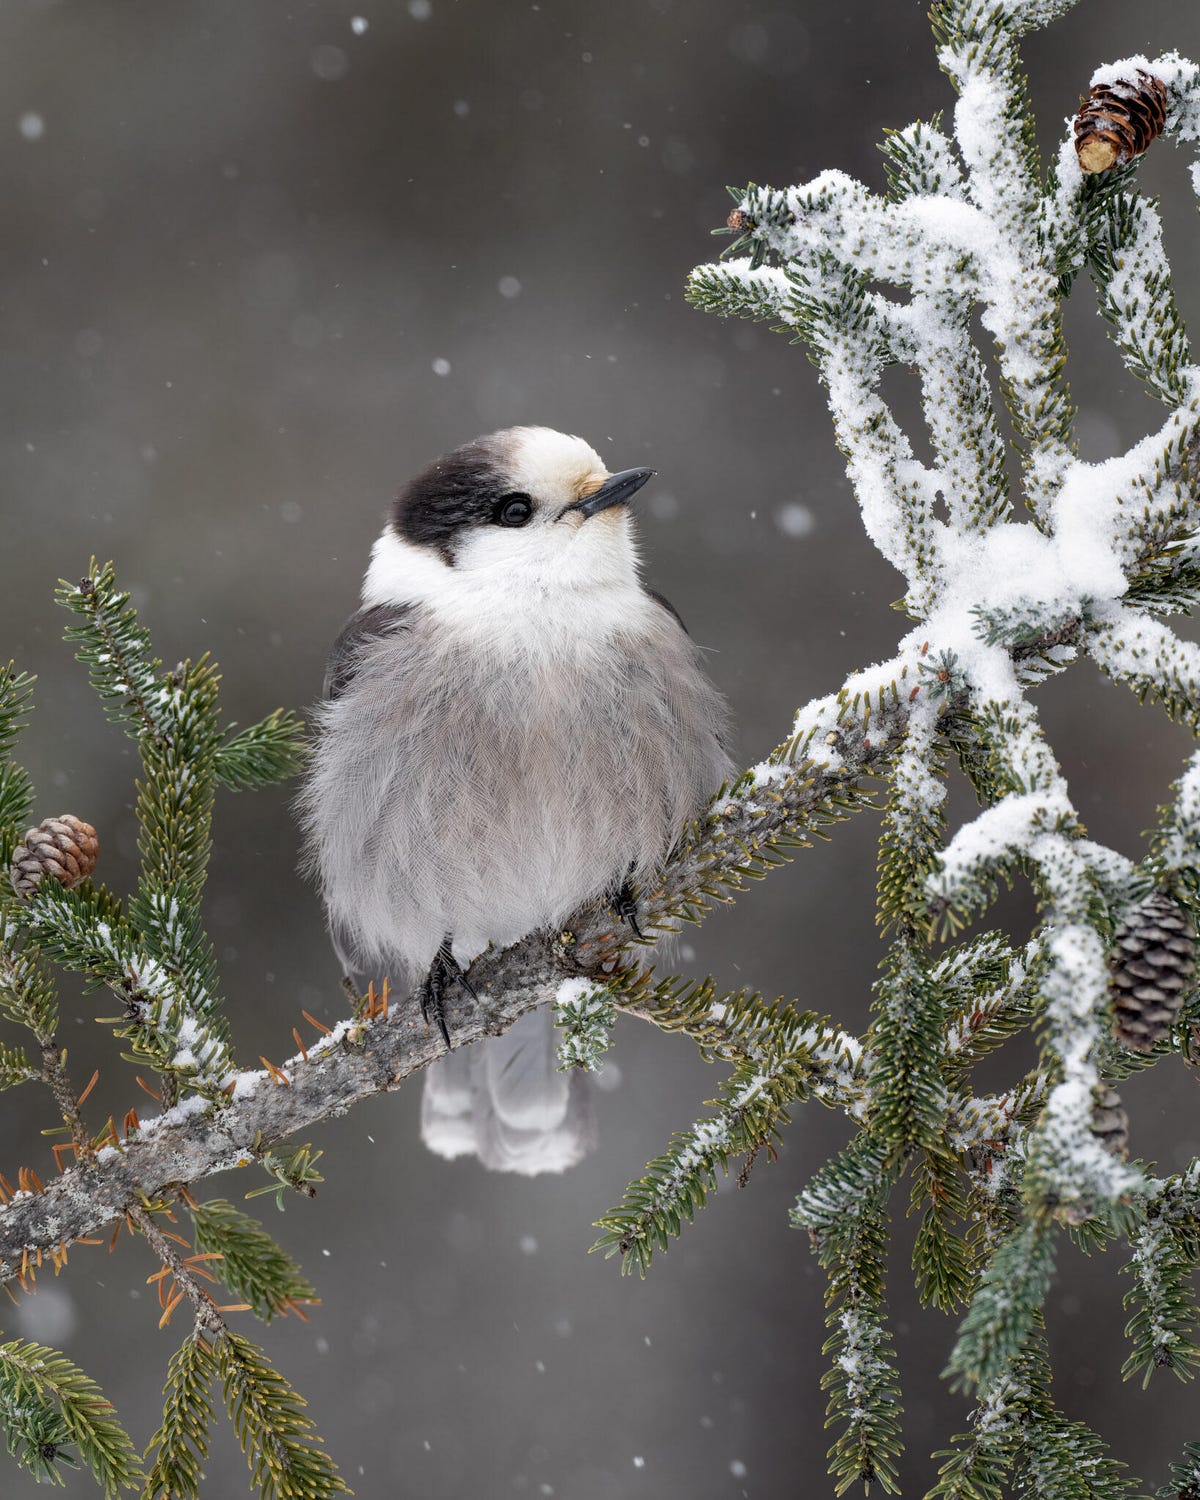 Mostly white, fluffed-up bird with black on its head perches on a branch in winter.